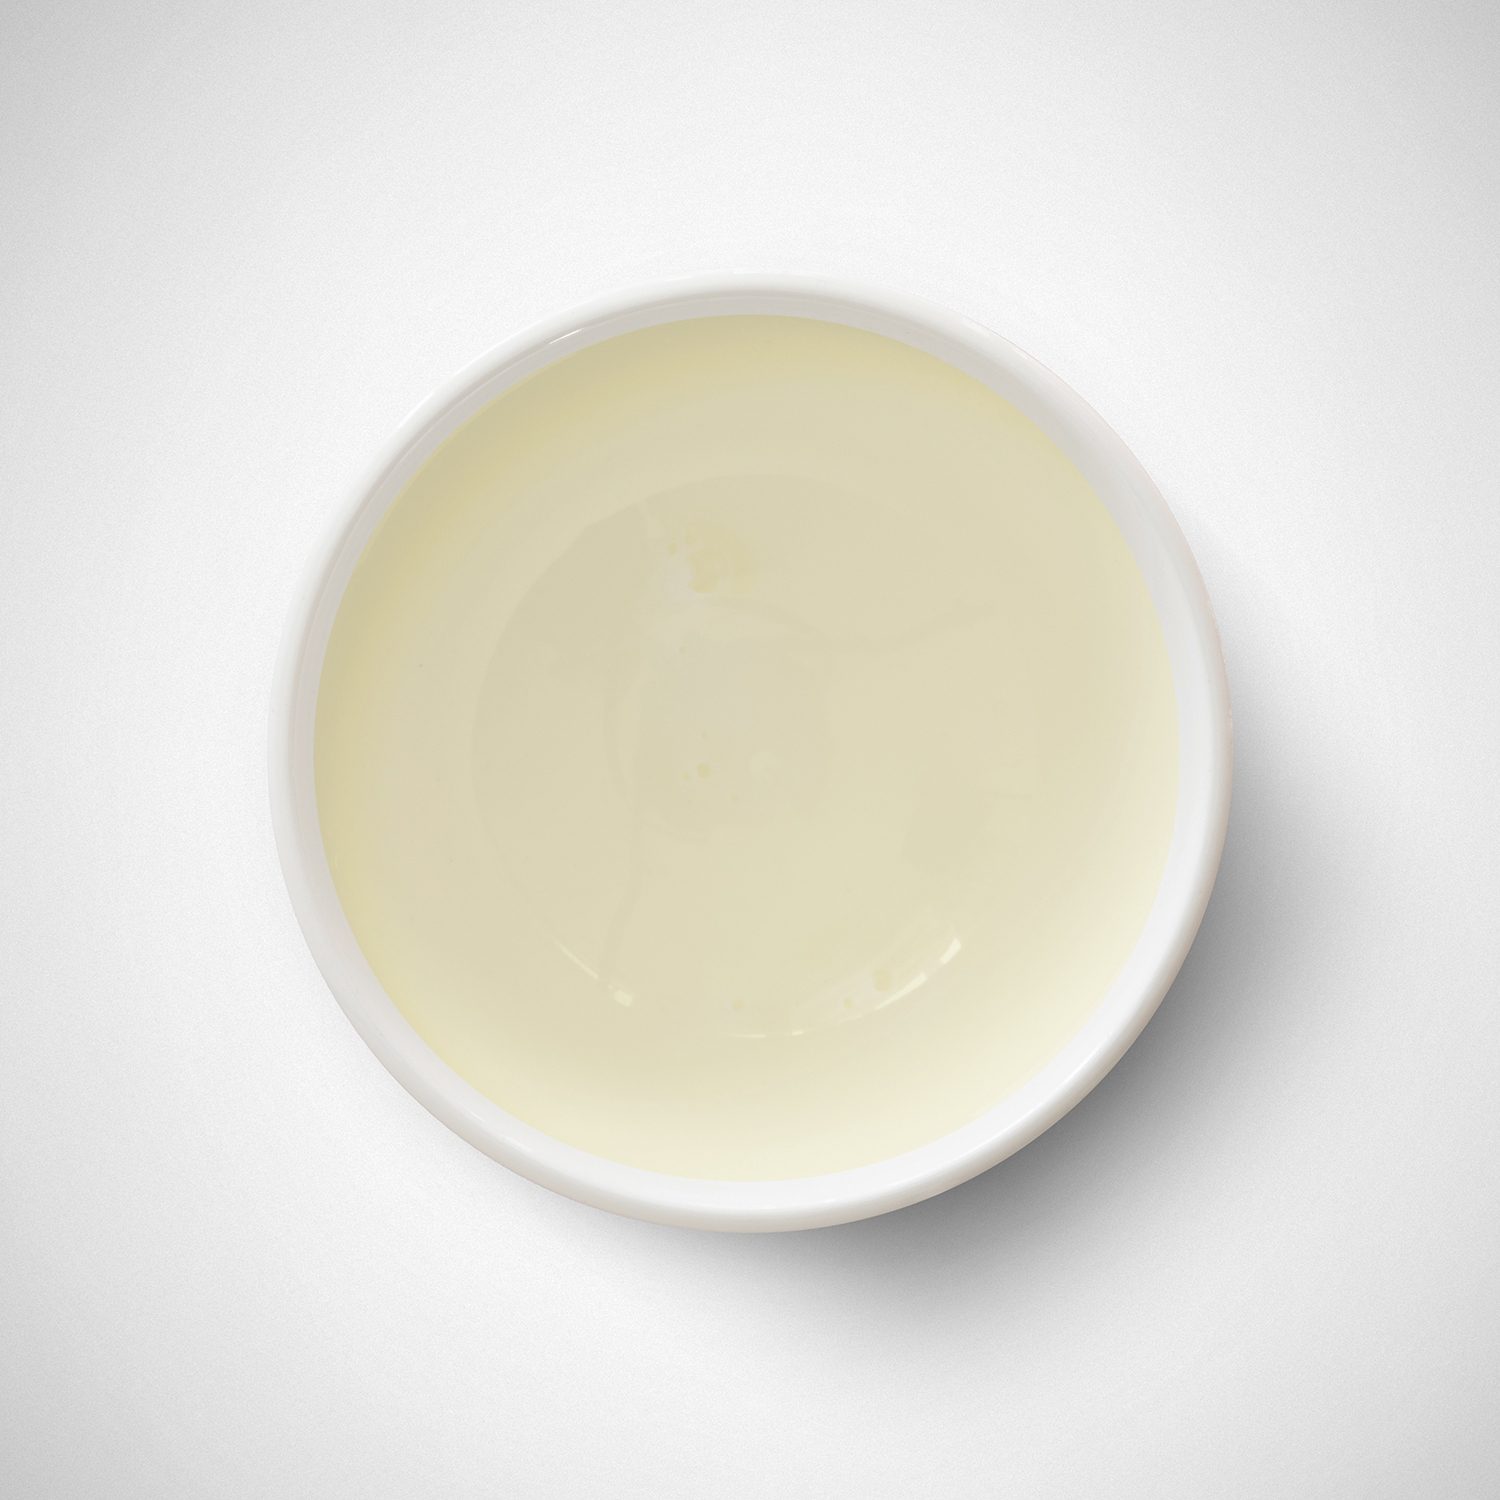 Creamy liquid in a small bowl on a white background.